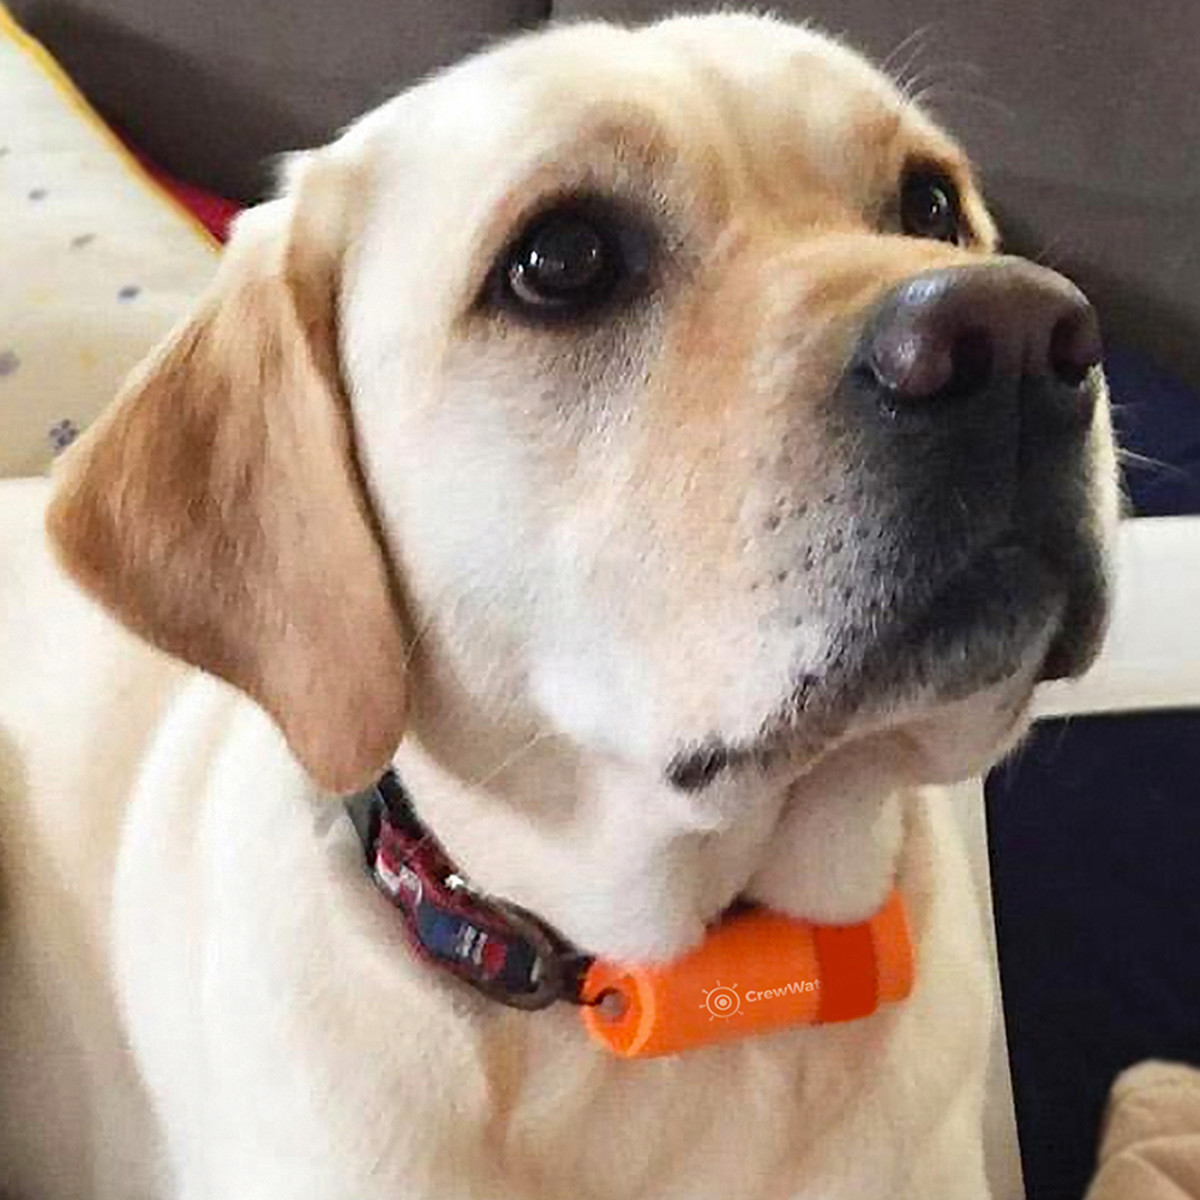 These beacons can even attach to your dogs collar of your pooch.